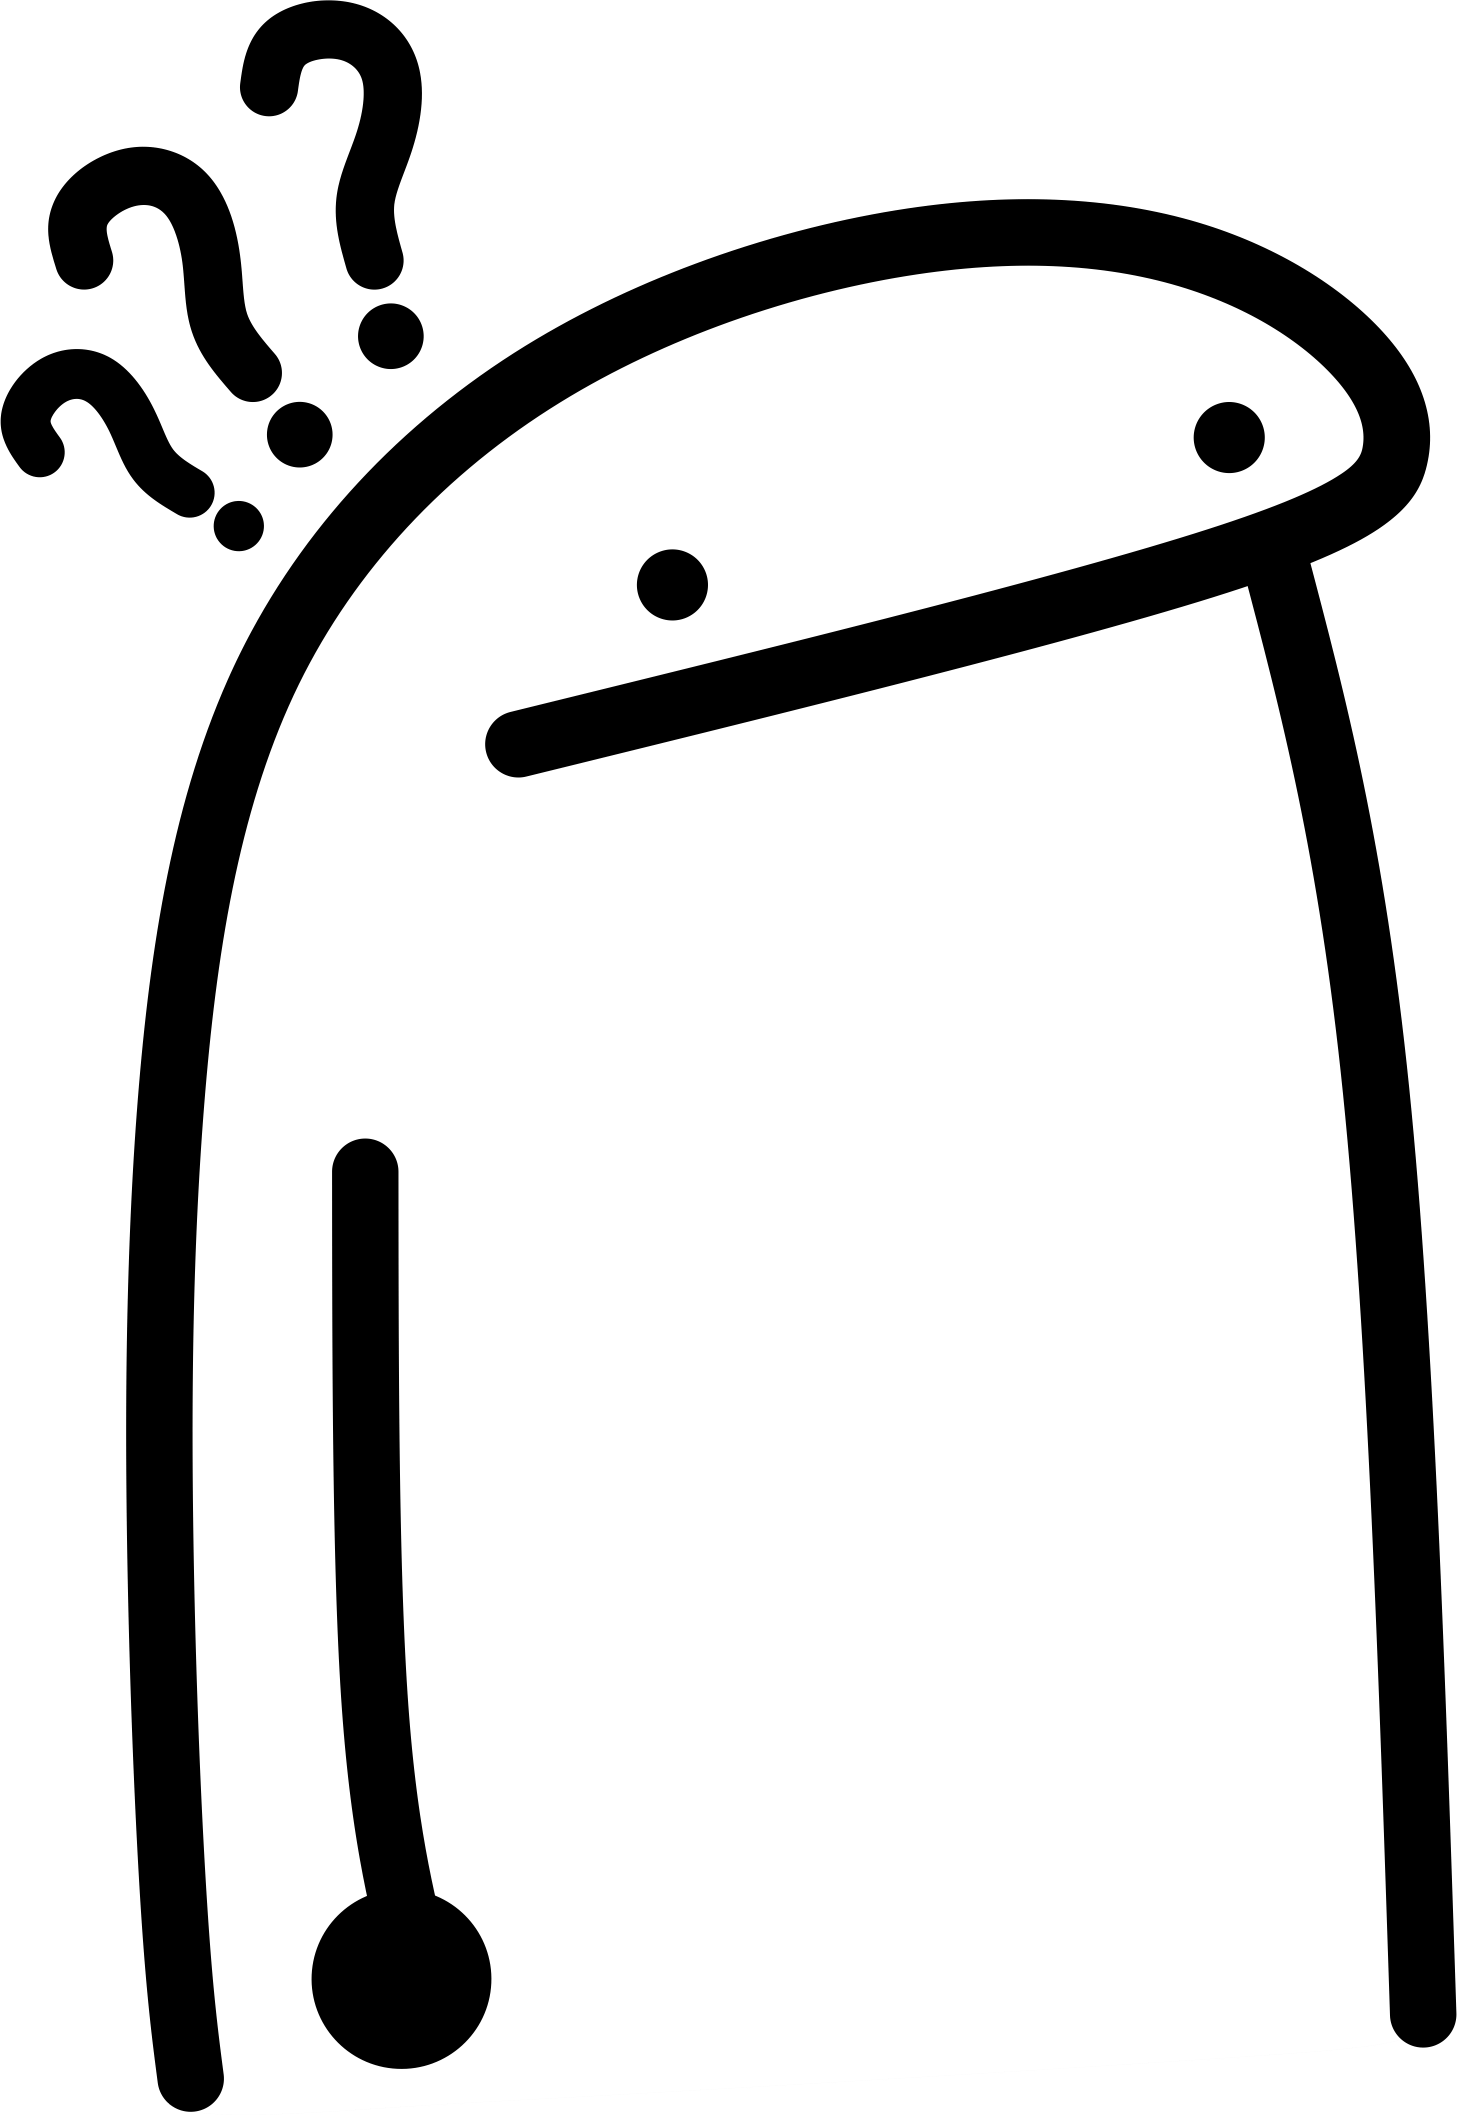 Thoughtful Flork Cool Fun Funny Sticker By @thecubansoul D77